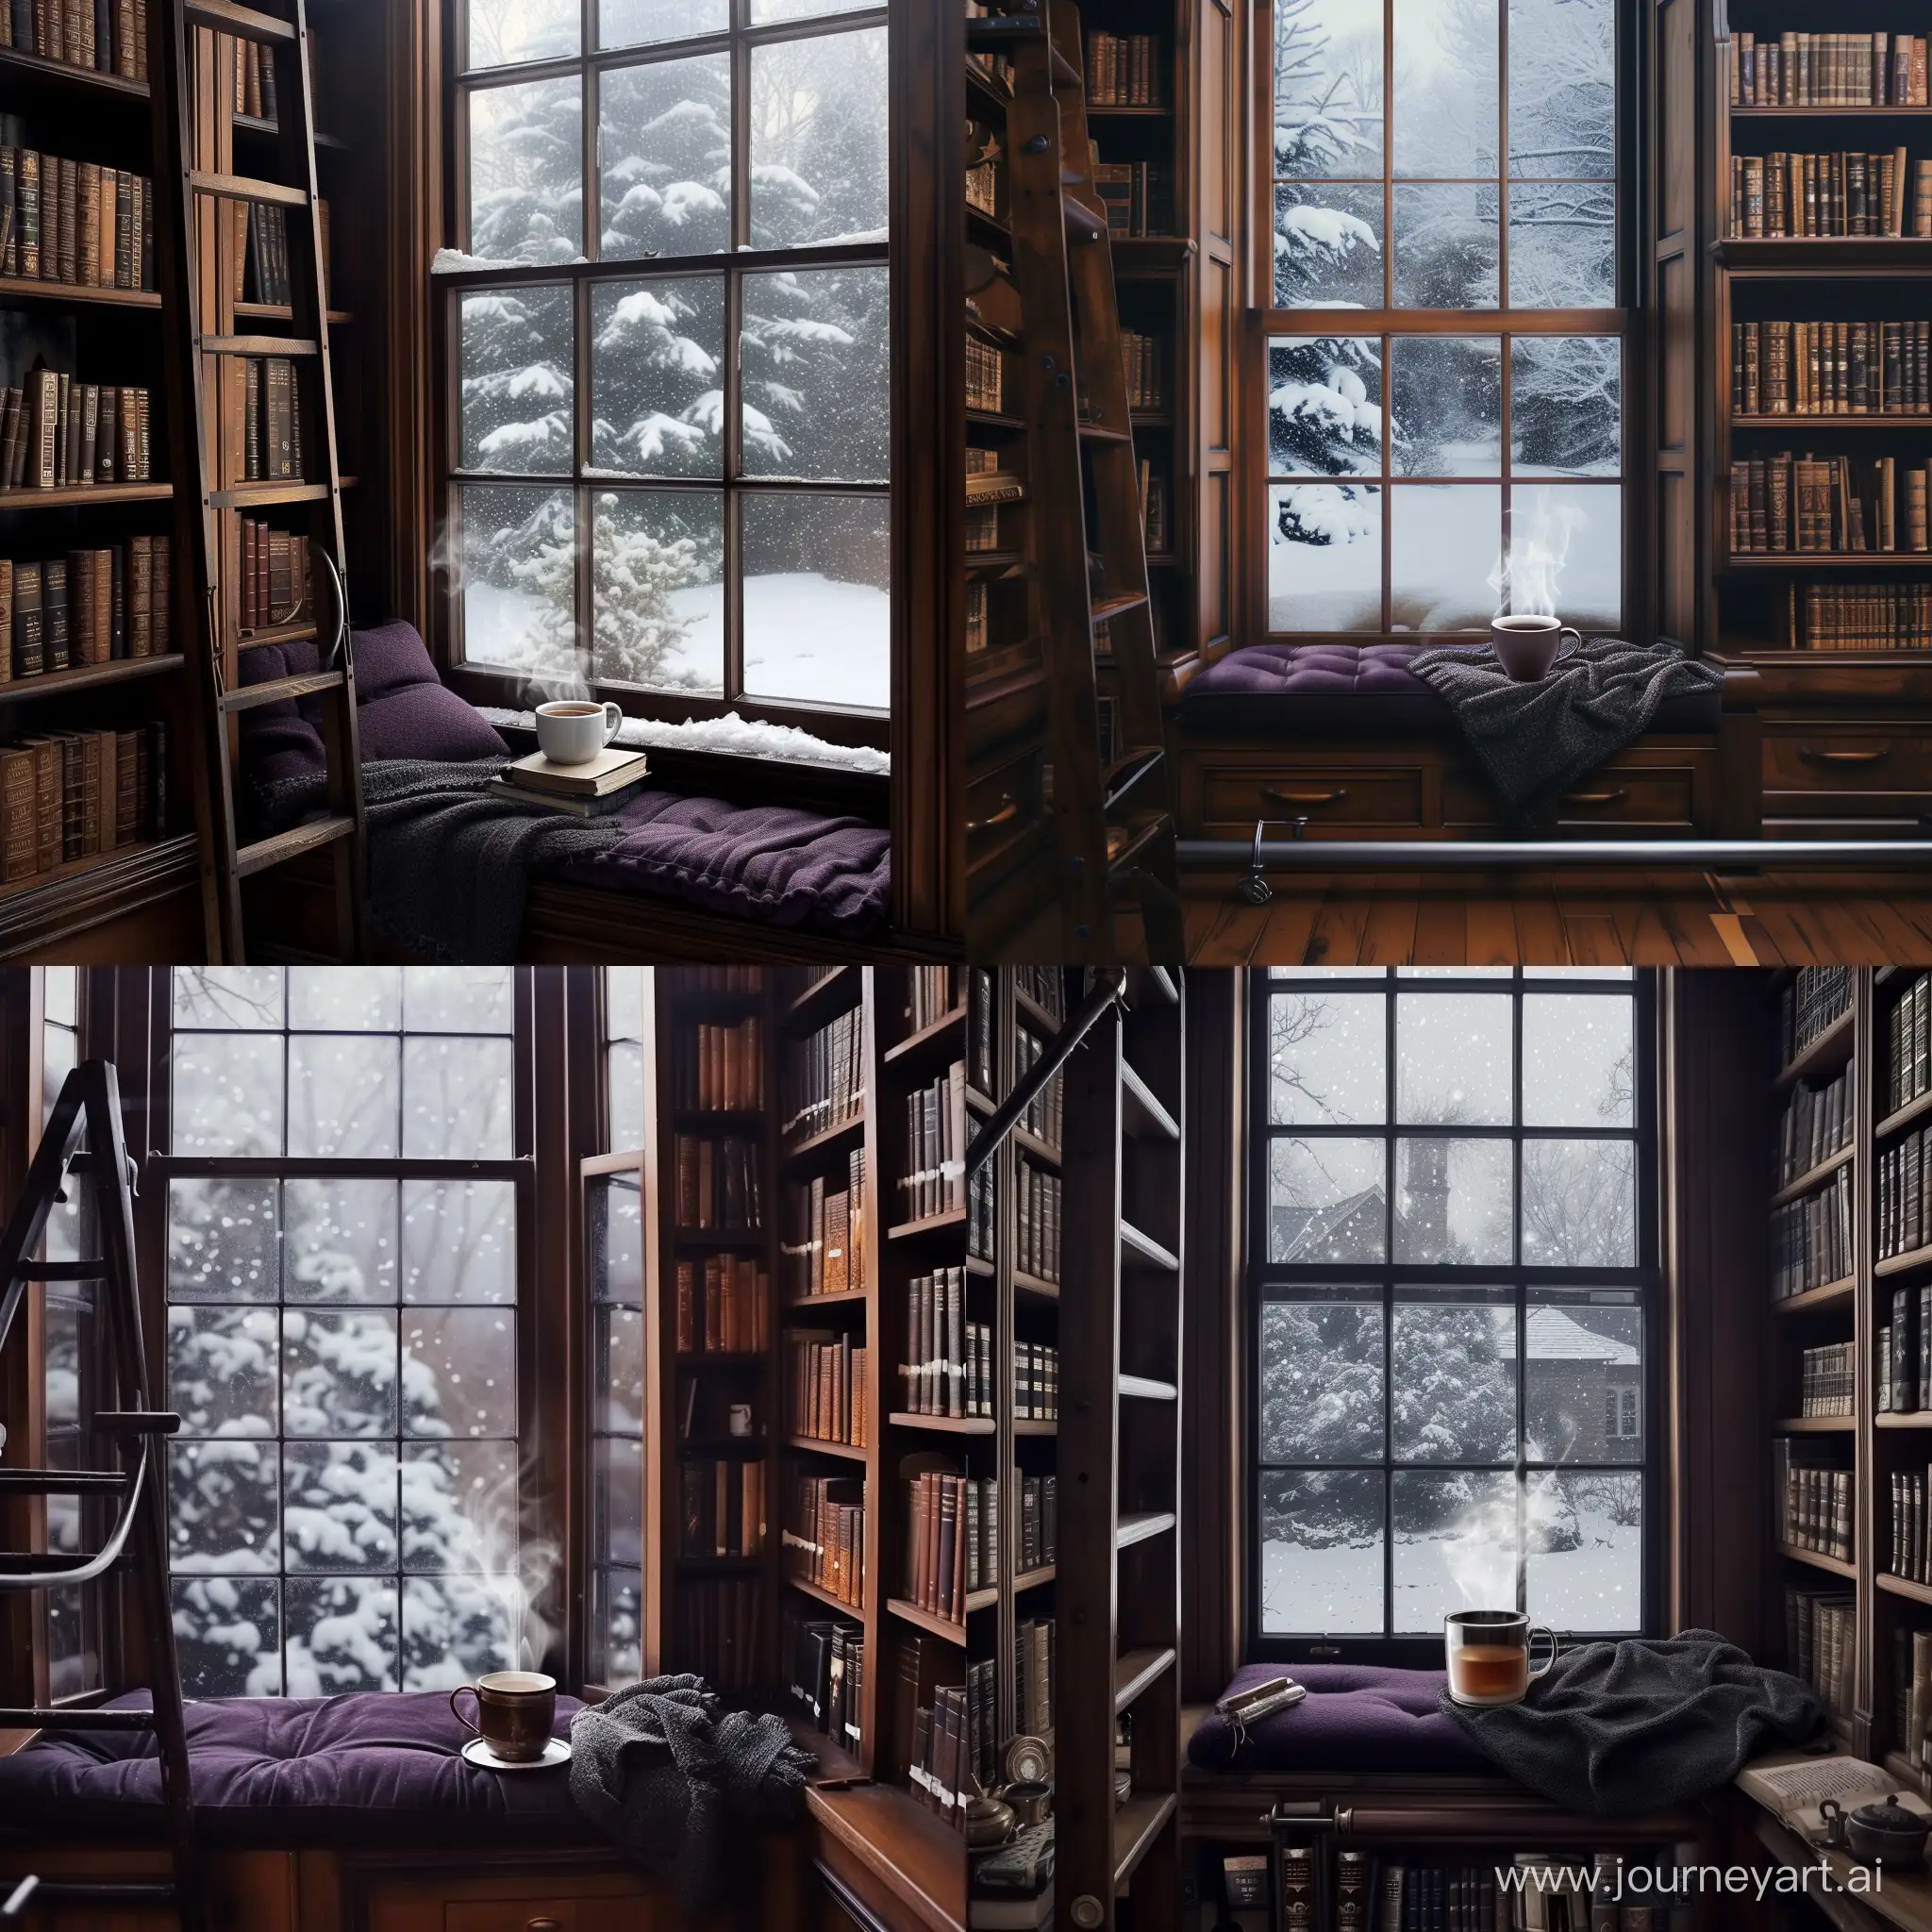 A Victorian inspired multi level library room with dark wood shelves, a rolling ladder, and a large picture window. The window seat is cushioned in dark purple and has a dark grey throw blanket. A steaming mug of tea sits on the window itself along with an open book. Outside is a winter wonderland of softly falling snow.